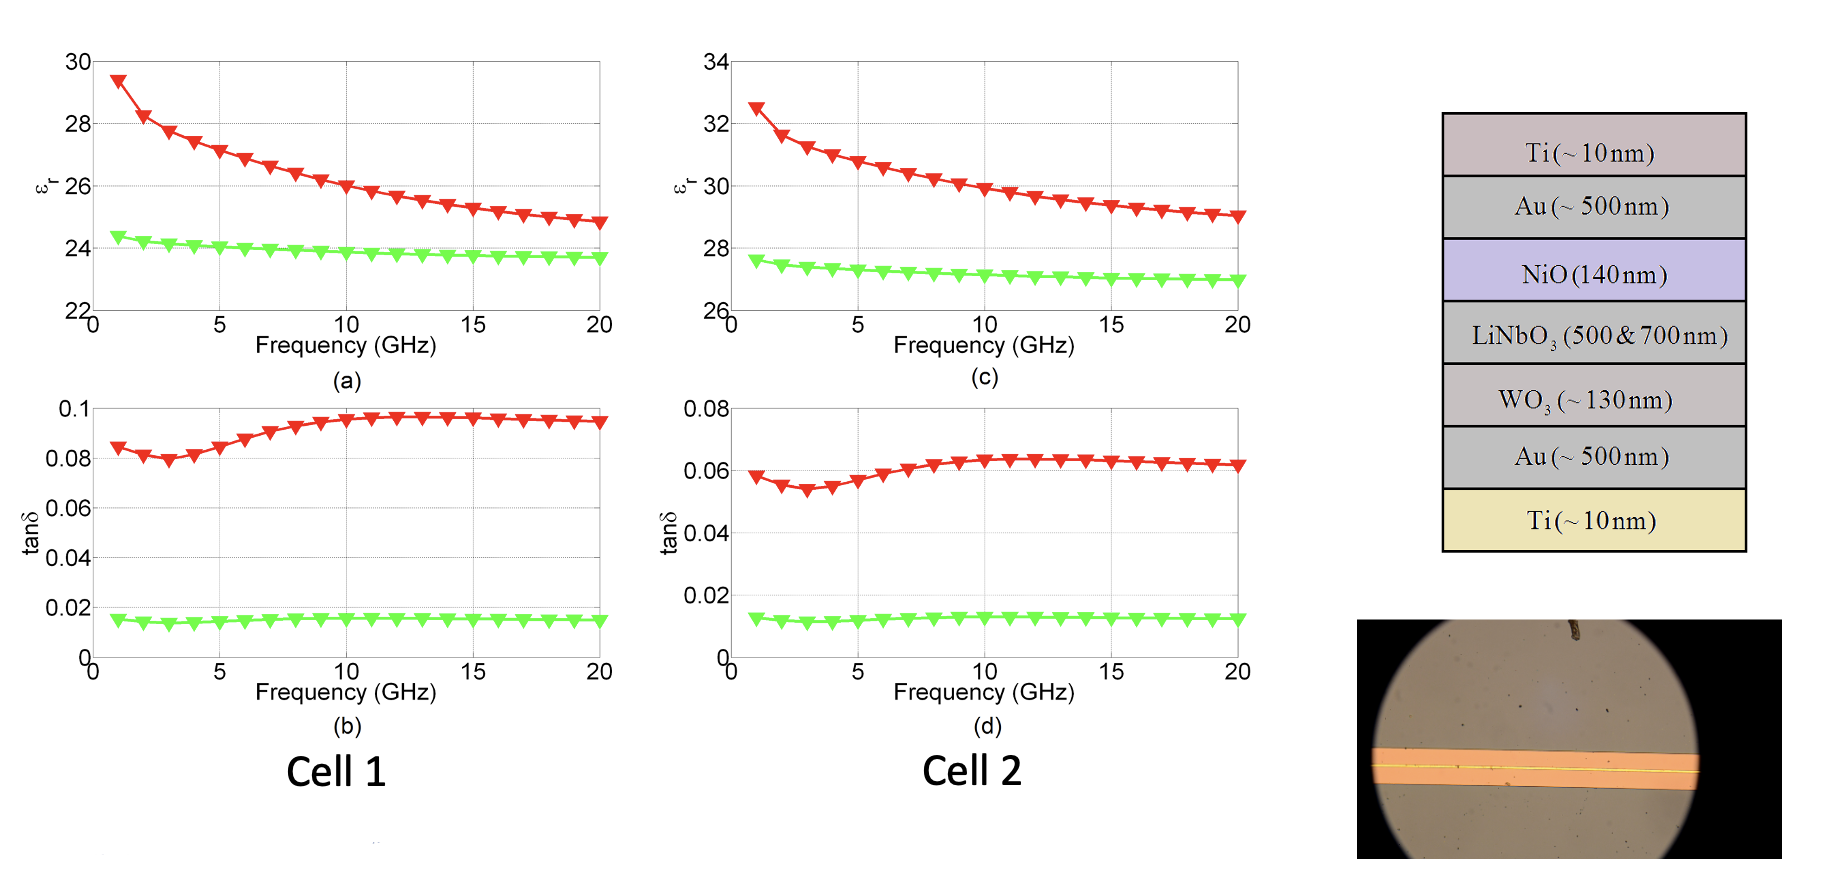 Initial dielectric tunability results for 2 cells